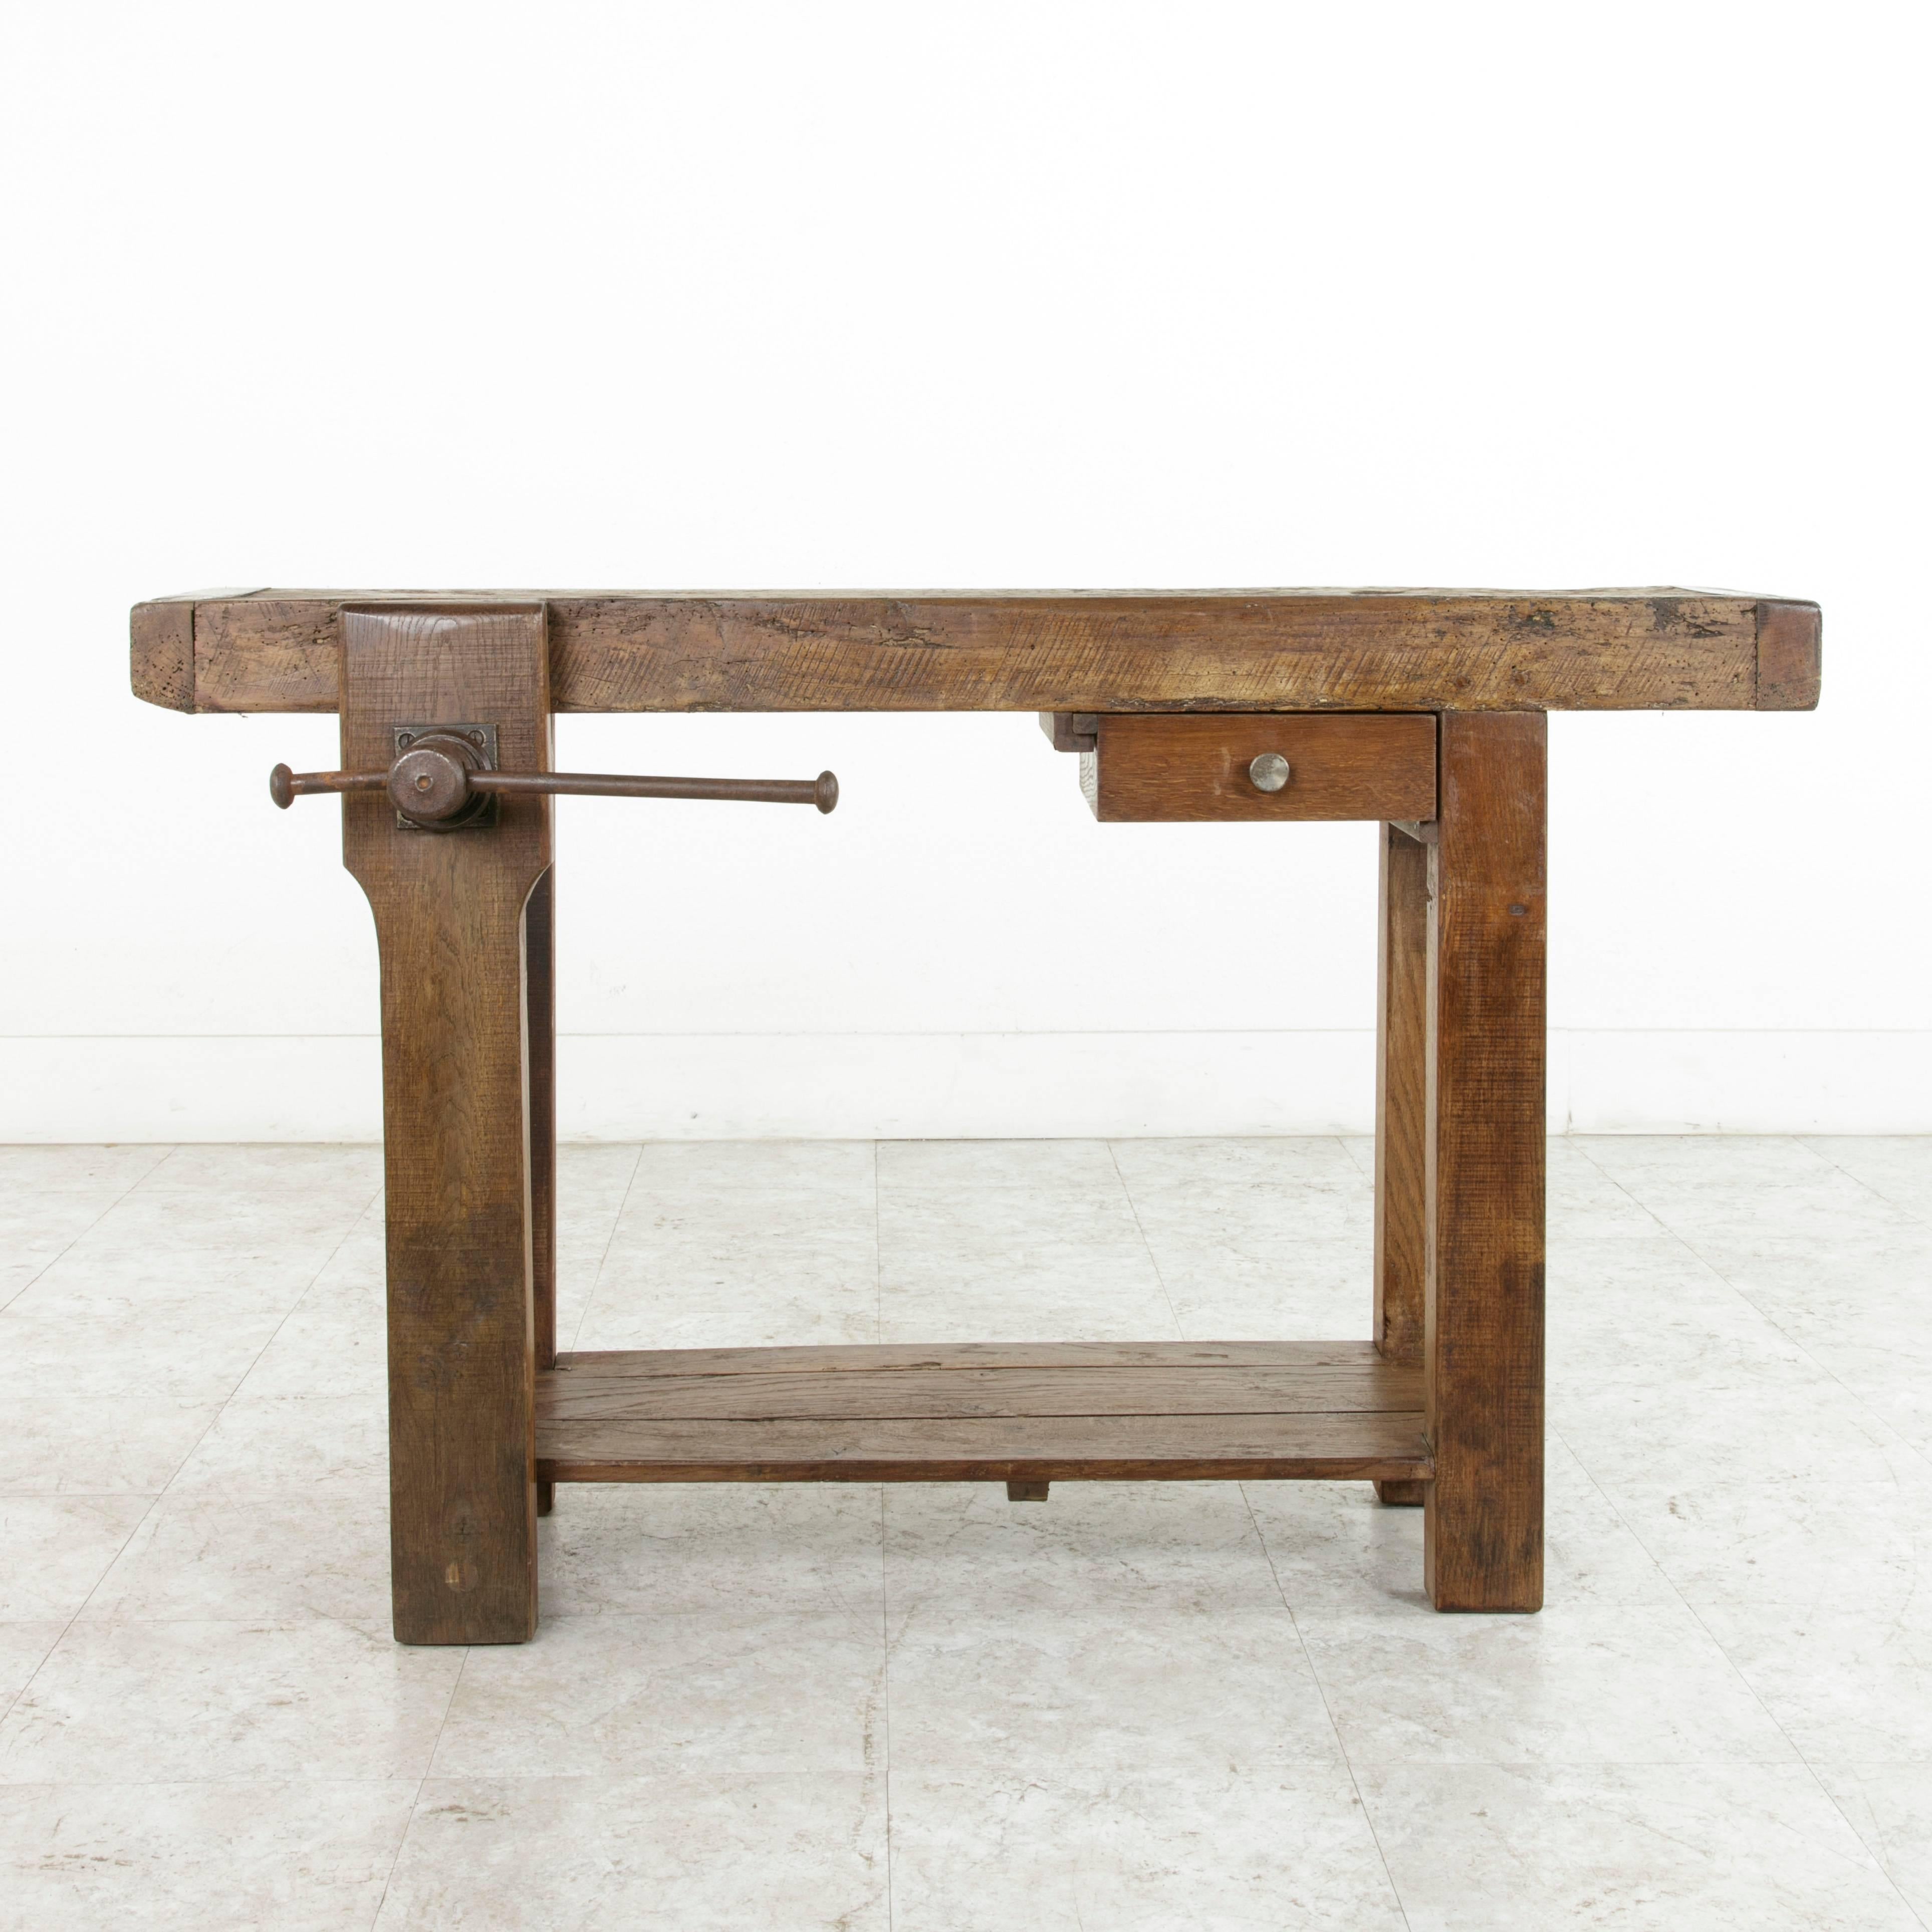 Iron Early 20th Century French Oak Workbench, Sofa Table with Single Drawer and Vice